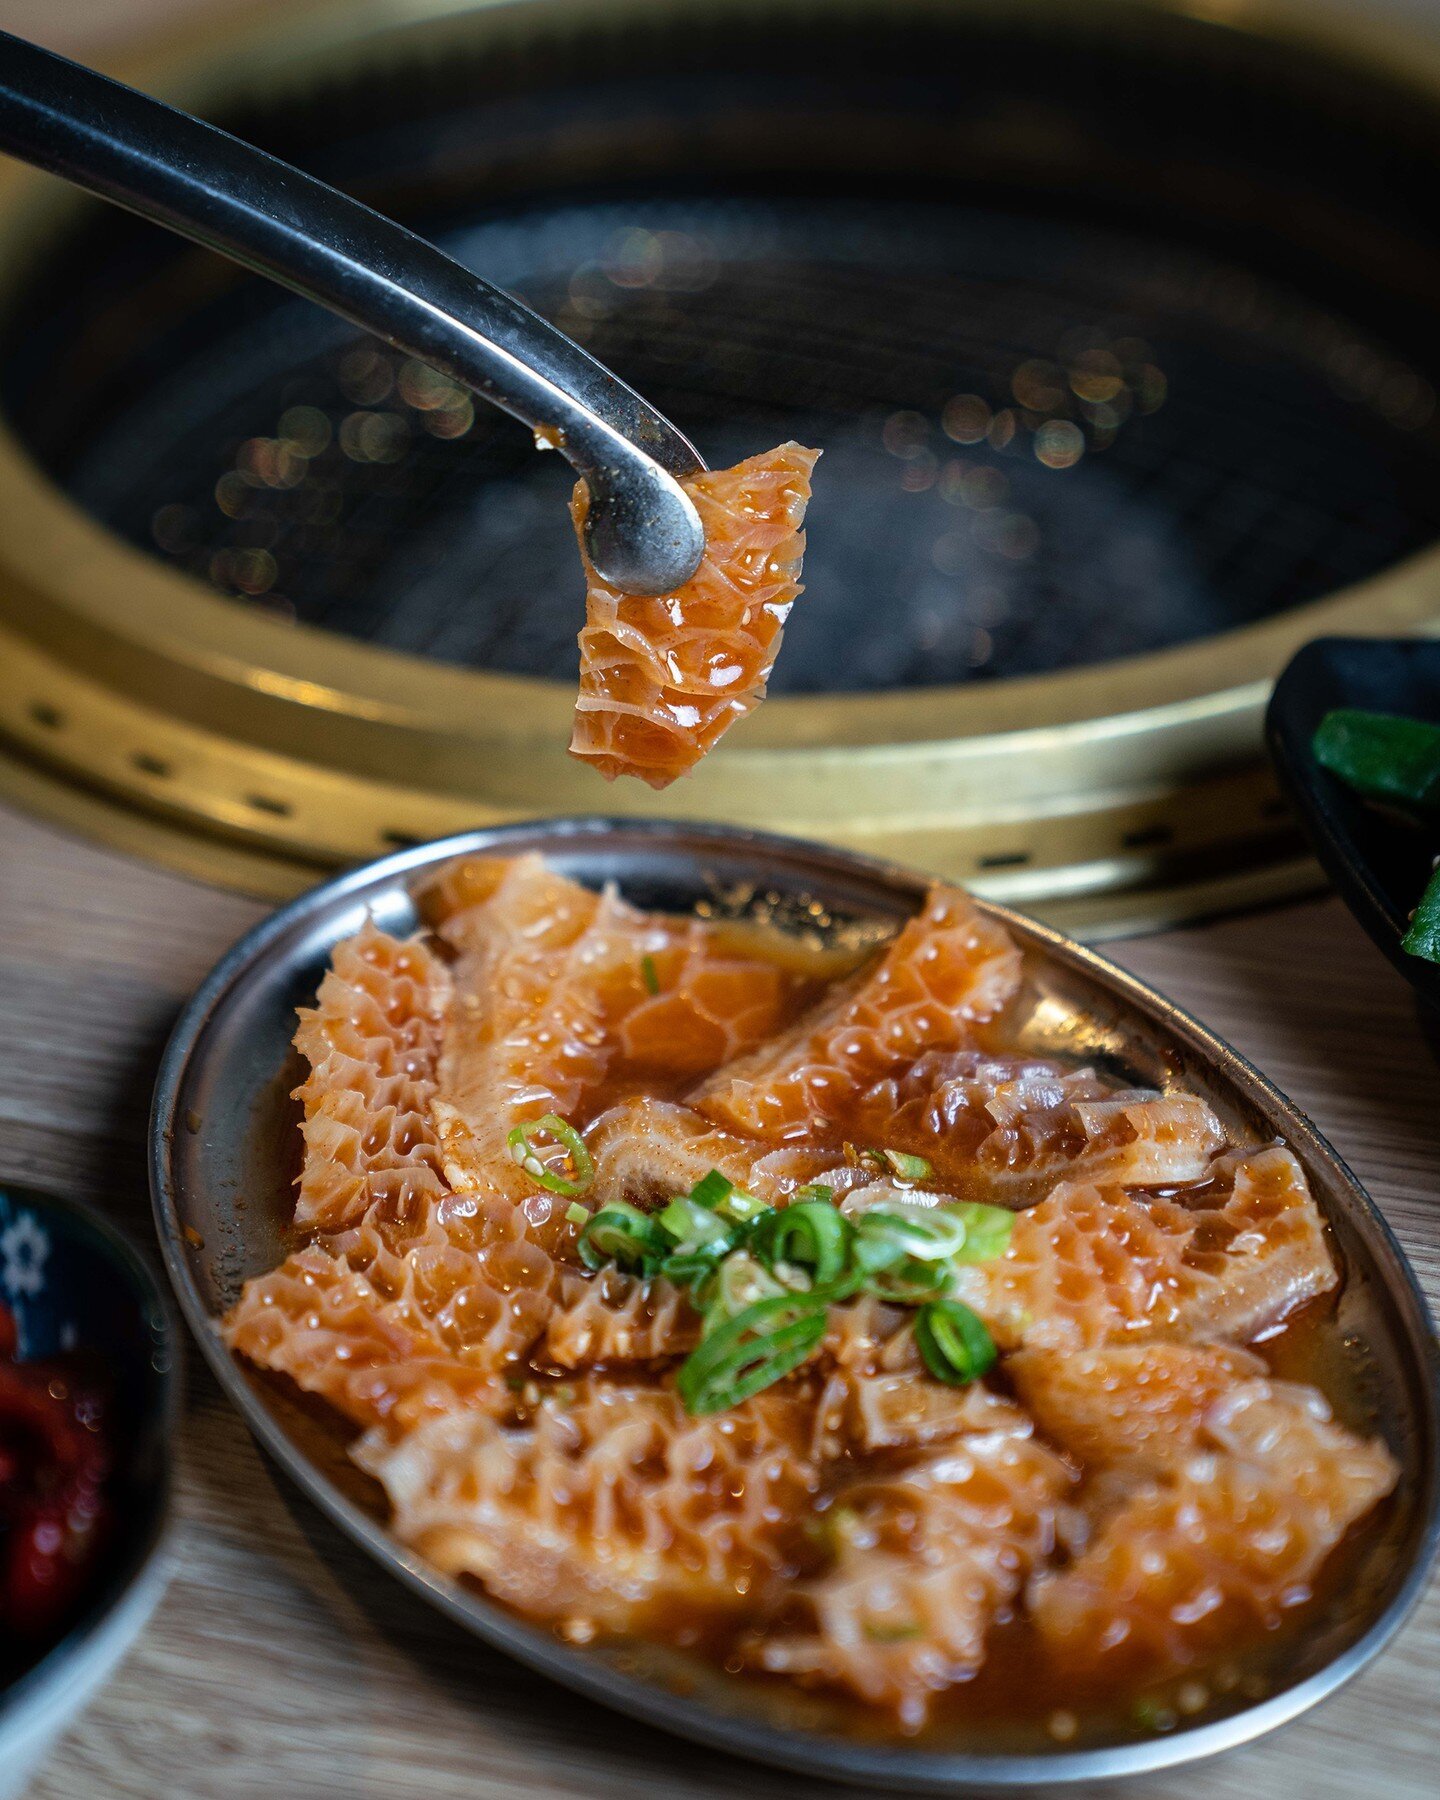 Love a good chew? Come enjoy our take on beef honeycomb tribe, drenched with rich flavours, the unique texture will have you craving for days 👌 

So make sure to leave some room for that 😉

焼いて、食べて、また来たくなる！ 

📍Burwood Grand
📍Regent Place

-
#yaki